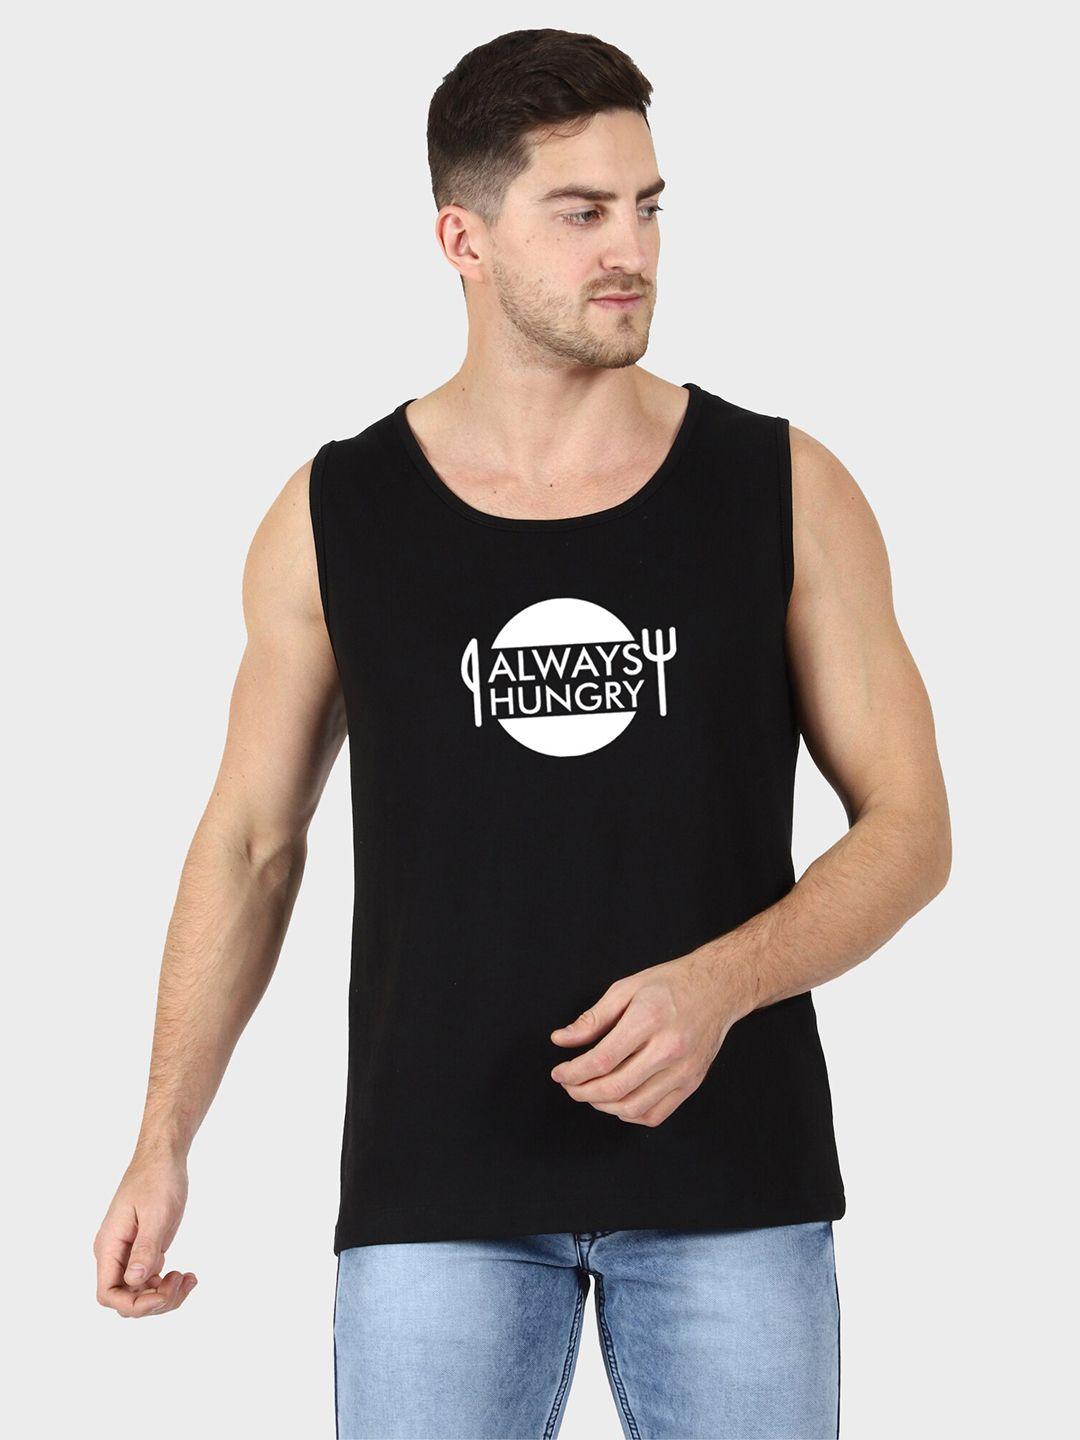 t-shirt truck typography printed sleeveless cotton casual t-shirt